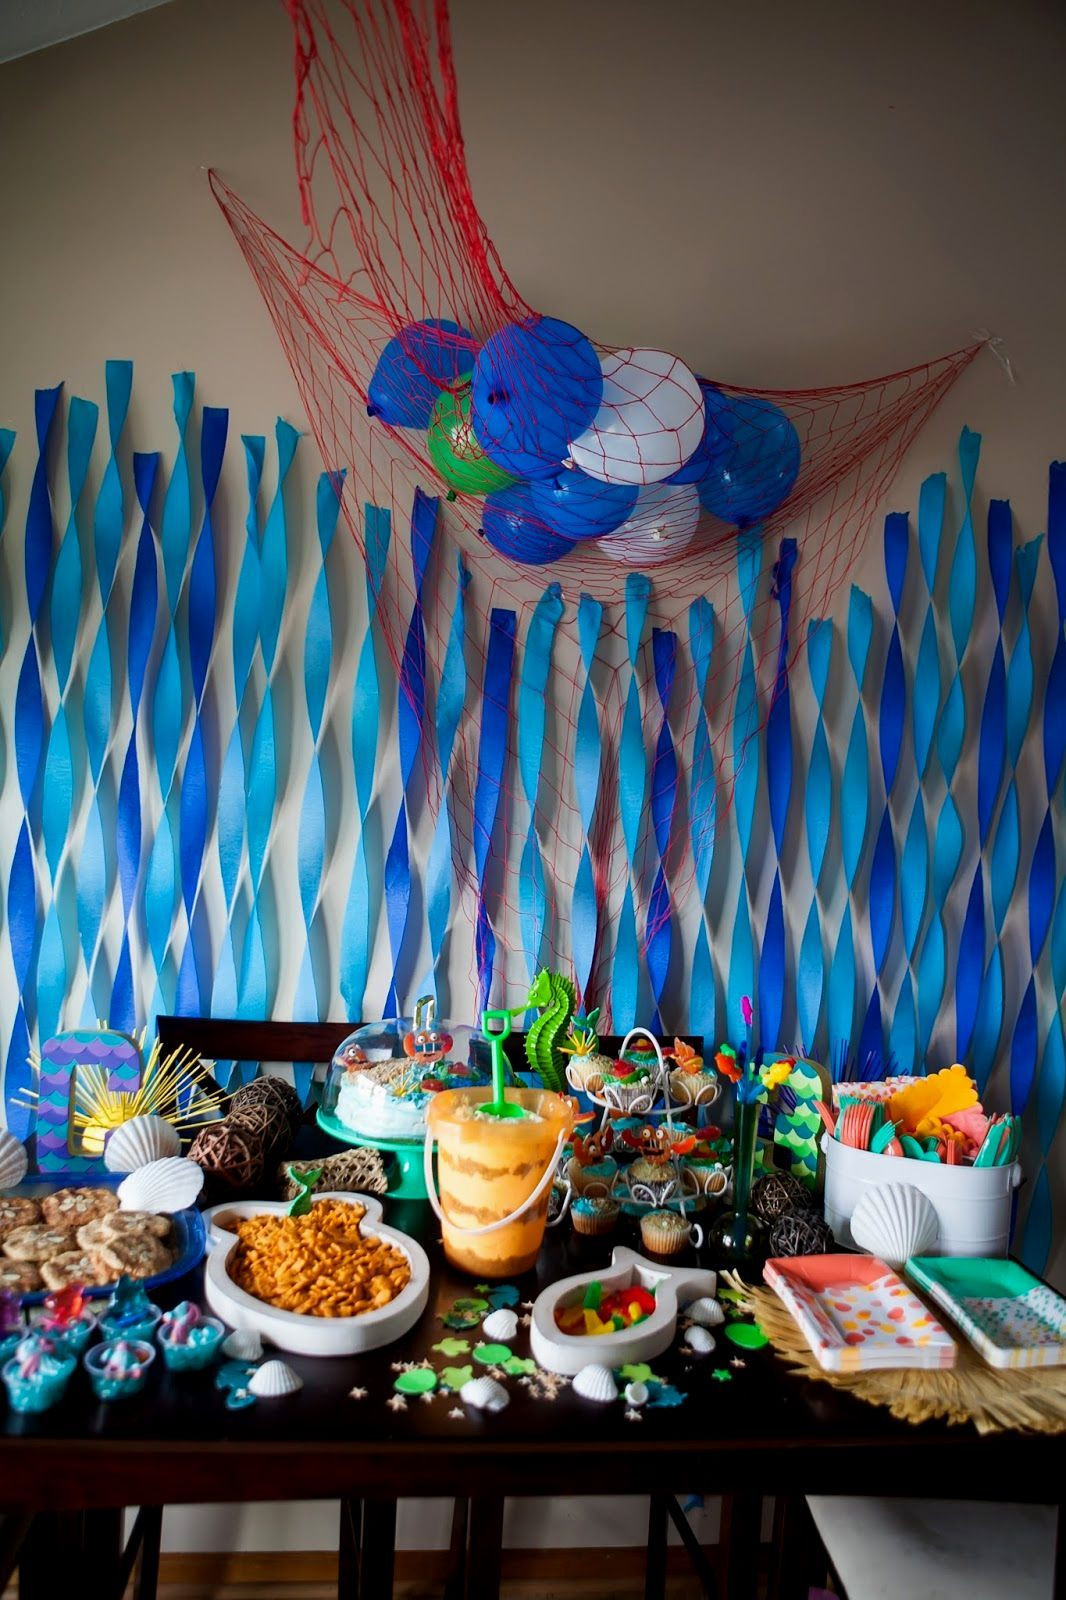 Beach Theme Decorating Ideas Party
 Pin by Aero FIT4U on Beach Party decorations in 2018